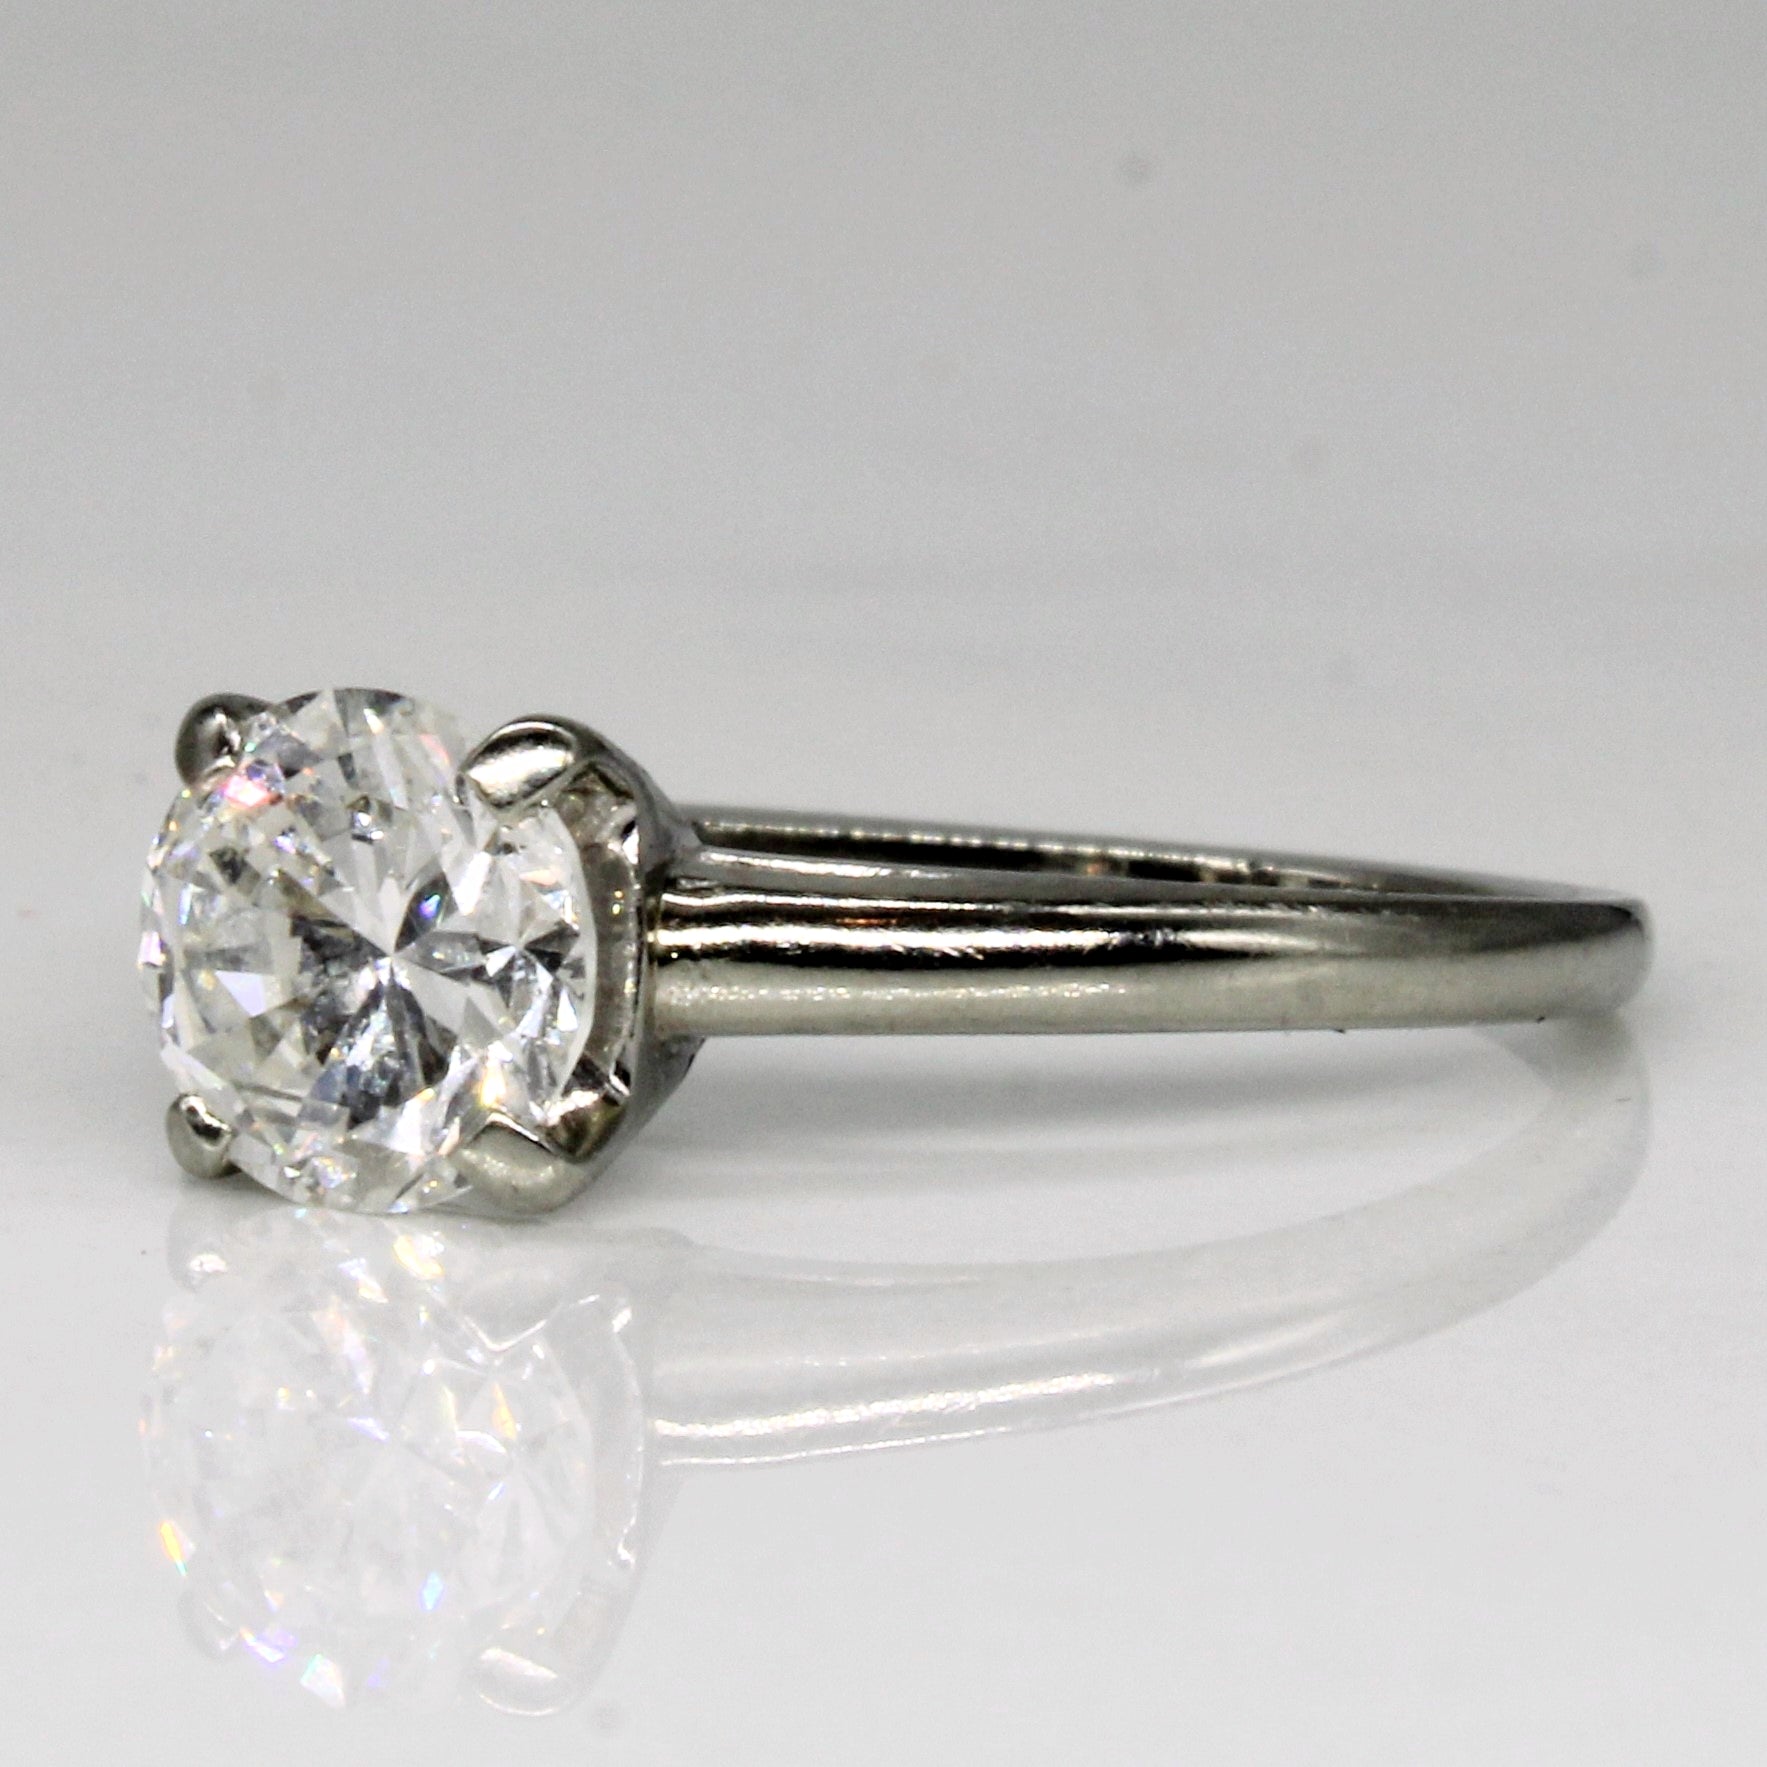 Diamond Engagement Ring With Sterling Silver 'Birks' Box | 1.04ct | SZ 6.25 | * no stamp for birks on ring*